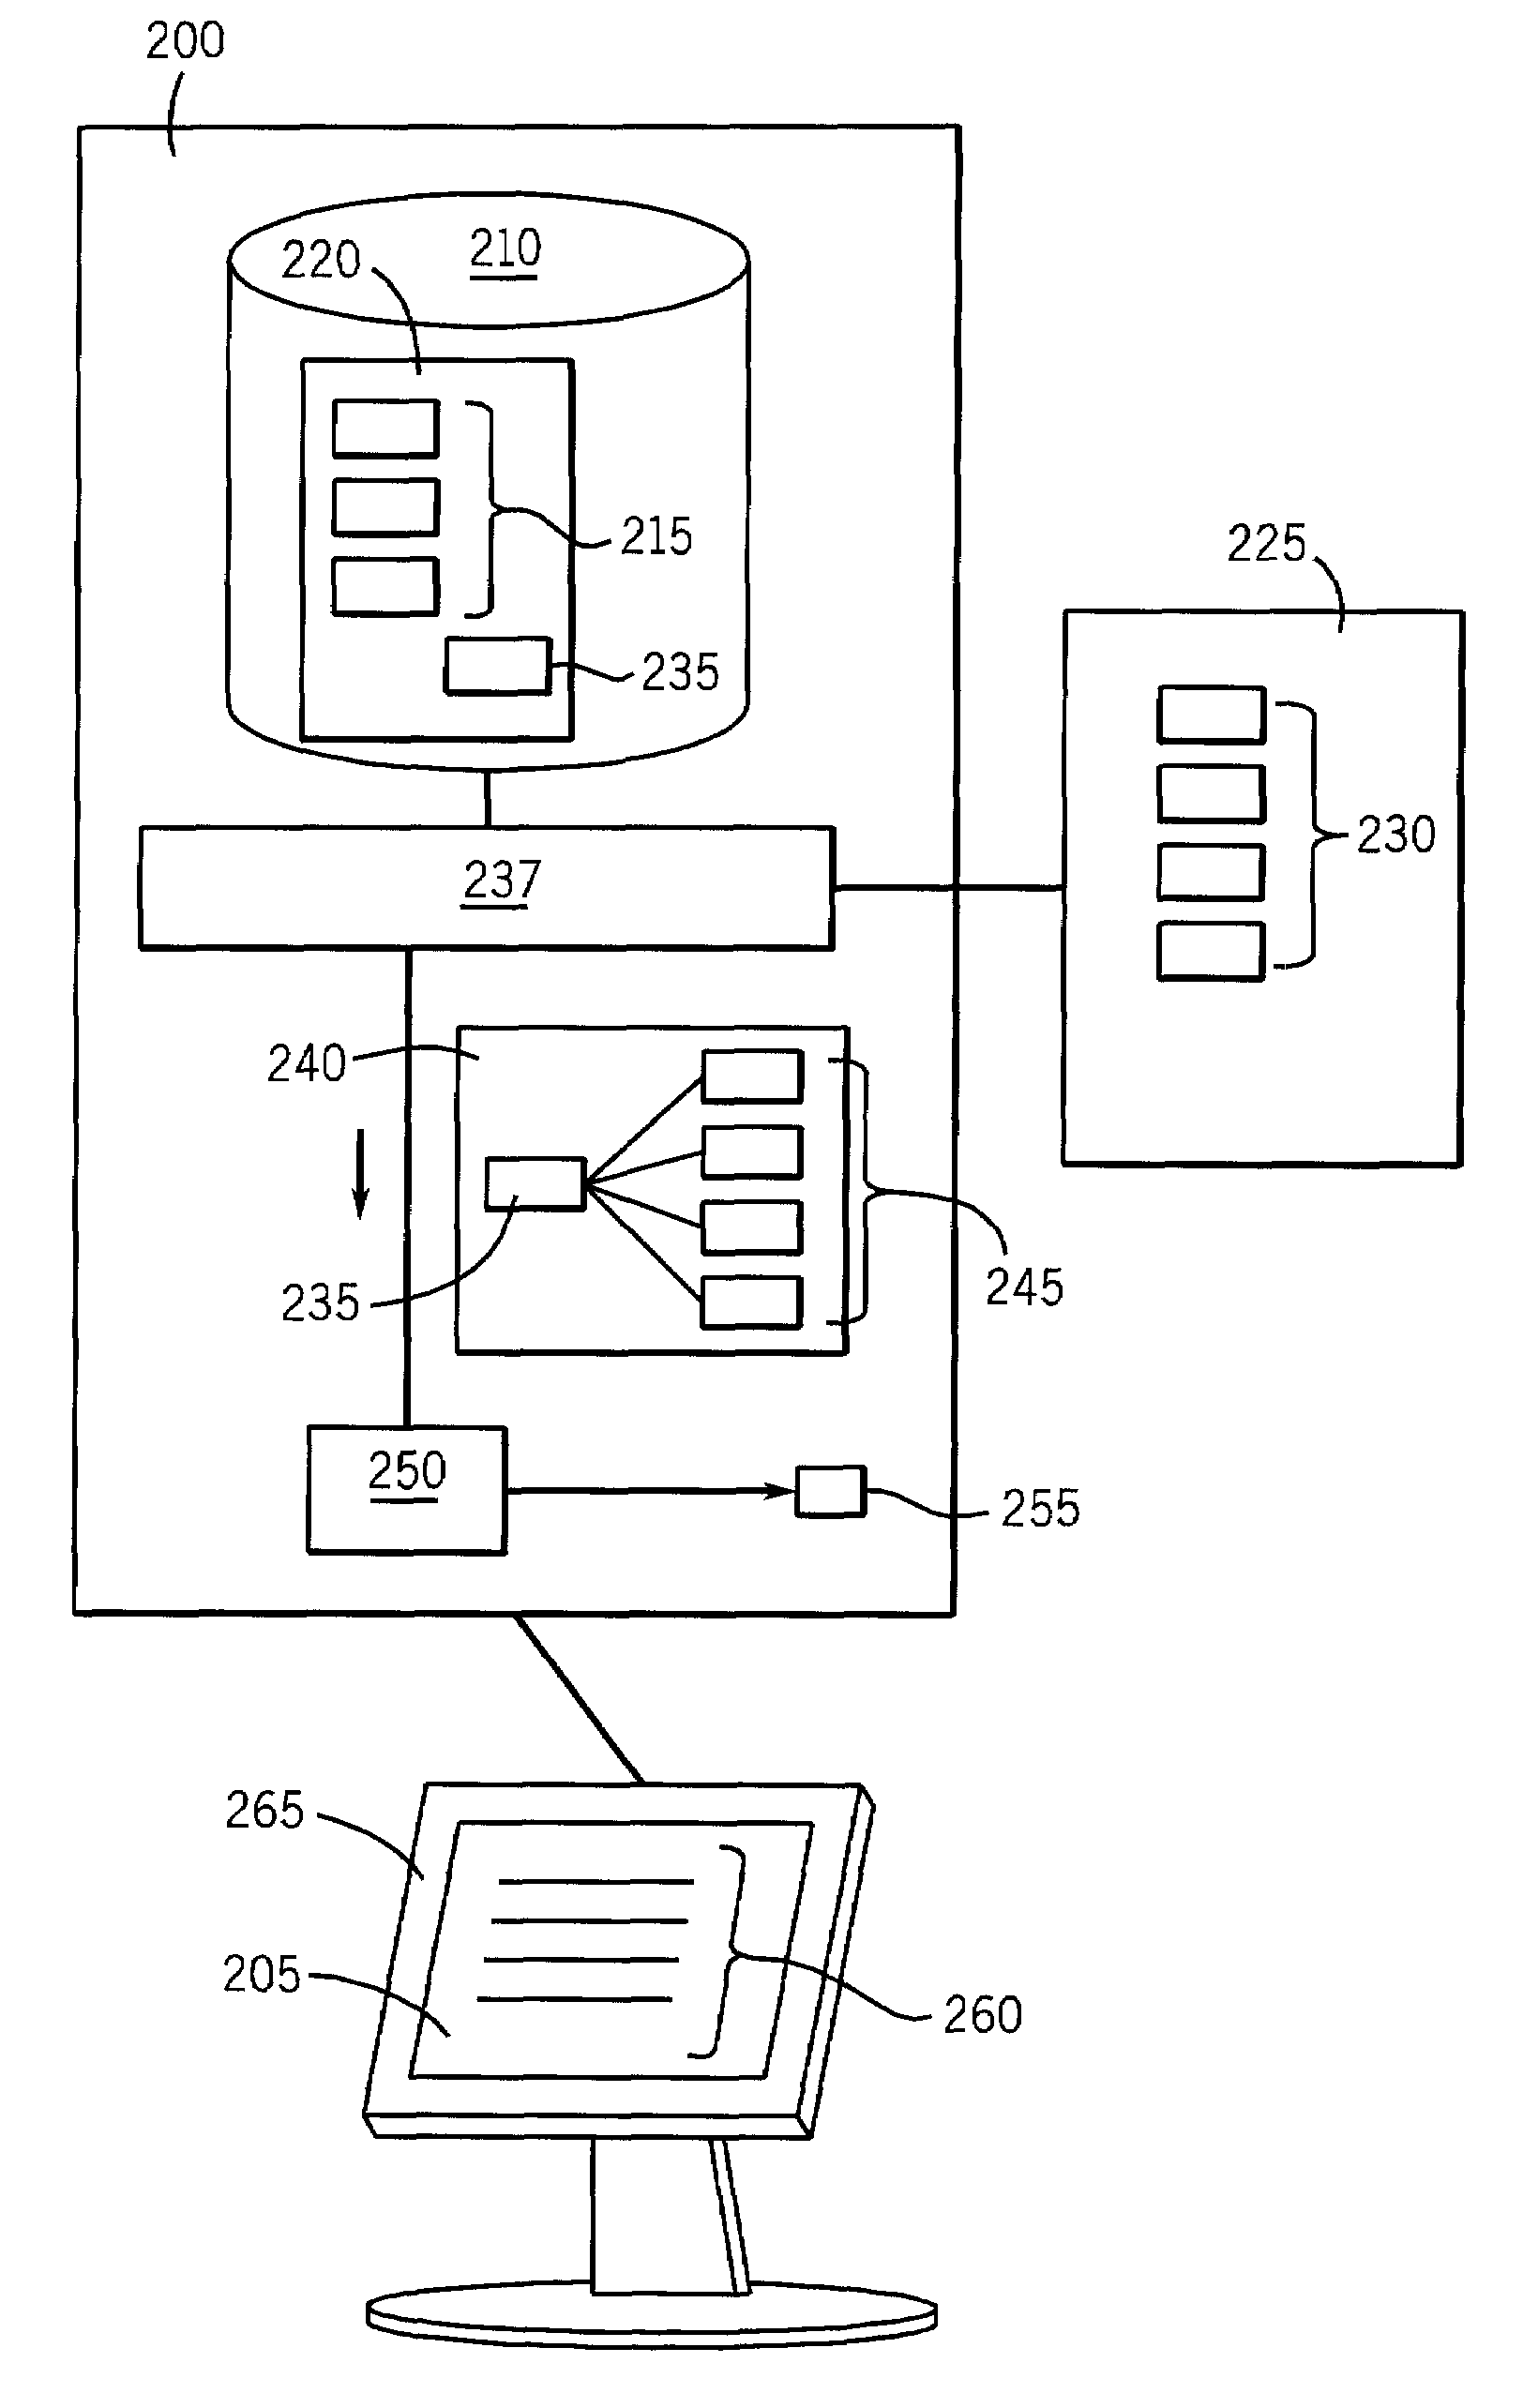 Data object access system and method using dedicated task object